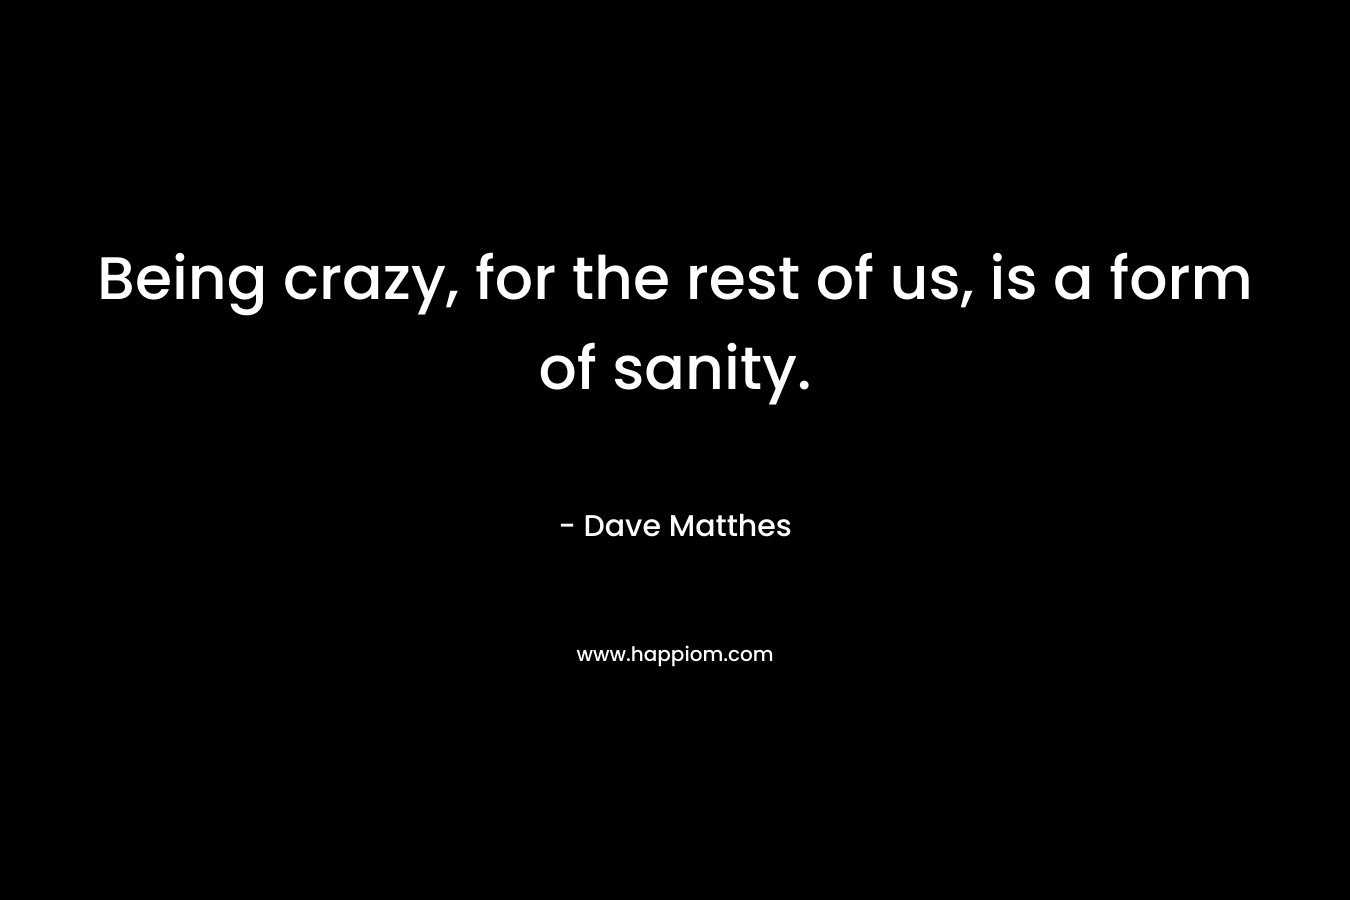 Being crazy, for the rest of us, is a form of sanity. – Dave Matthes